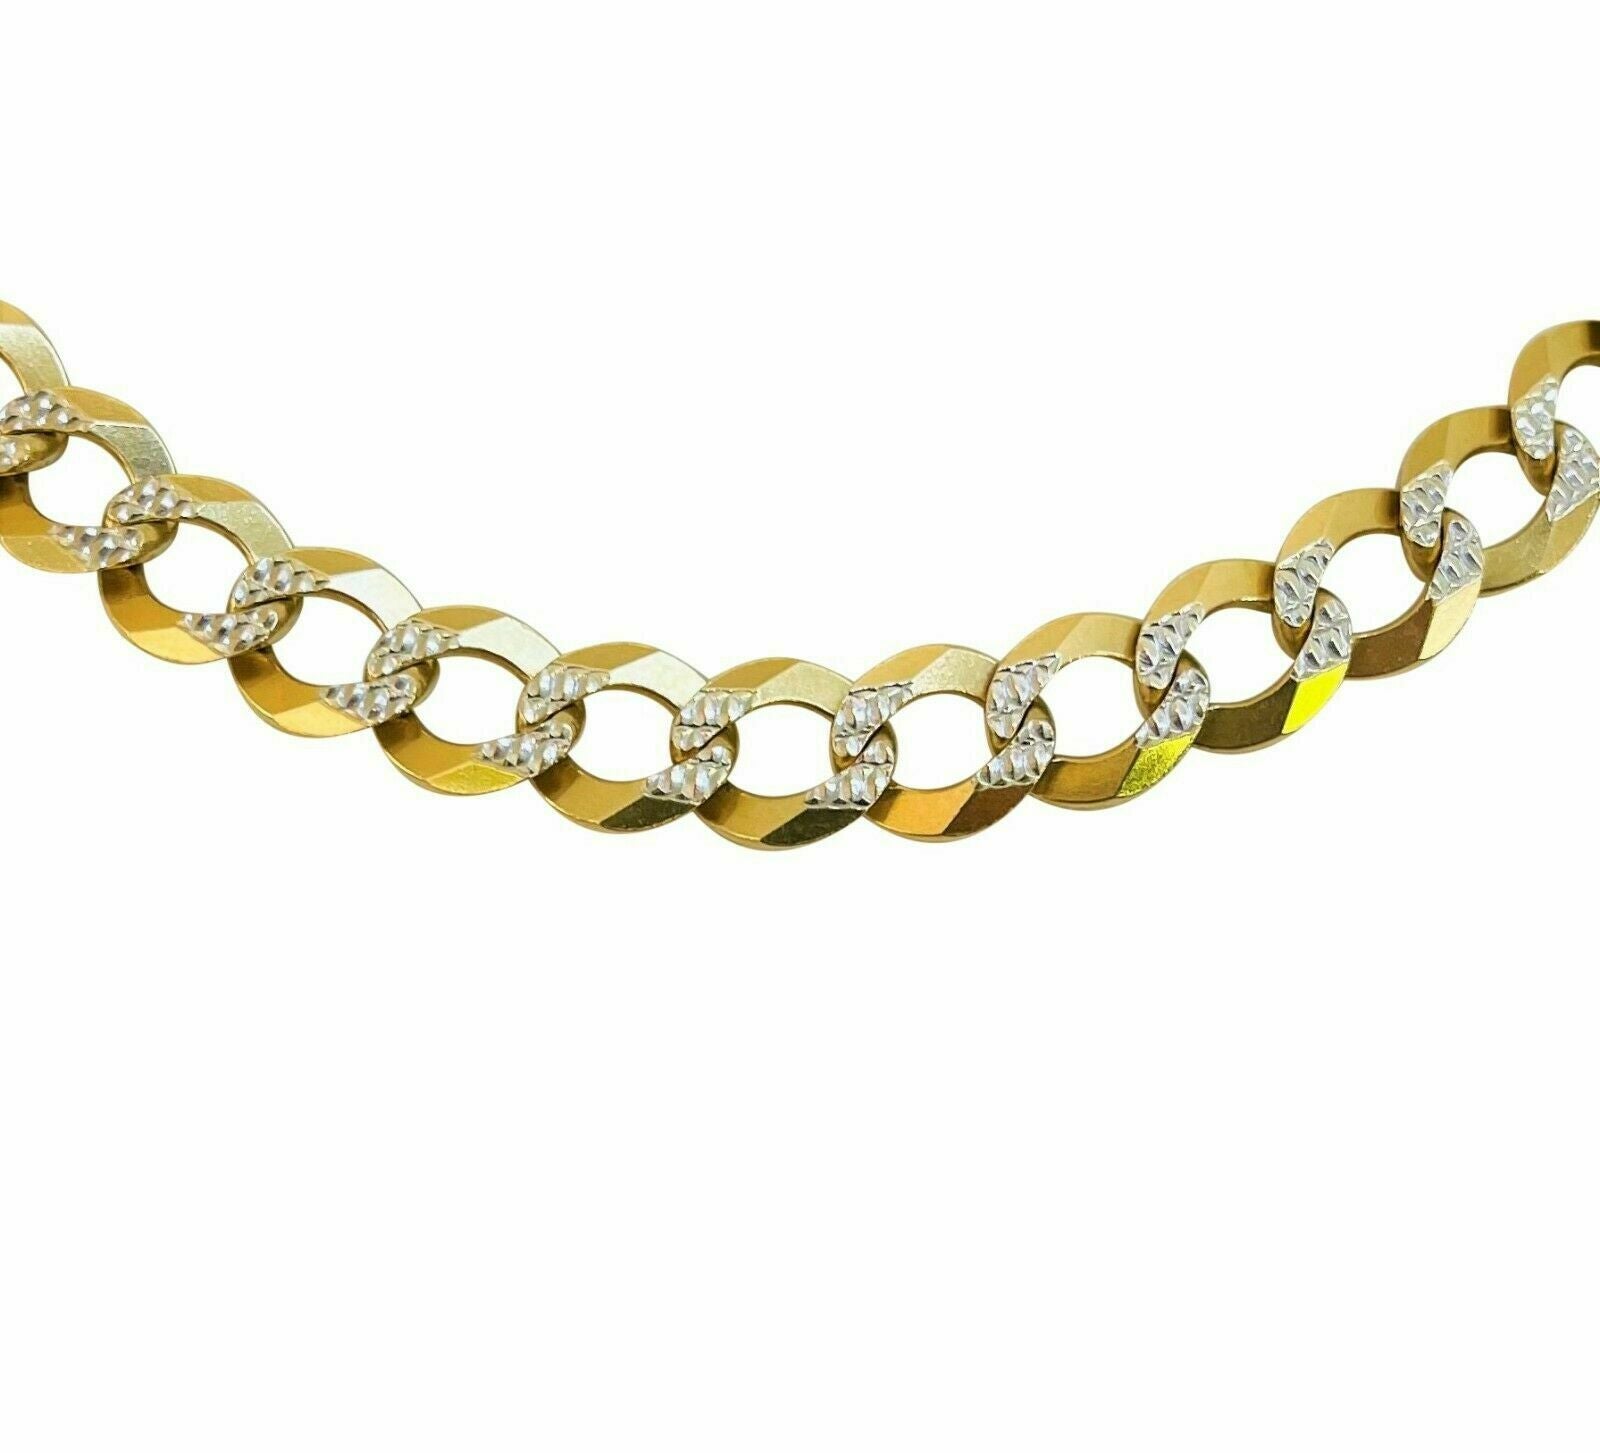 14K Diamond Cut Cuban Curb Link Necklace Chain 8mm 20" -30" REAL 14K SOLID GOLD